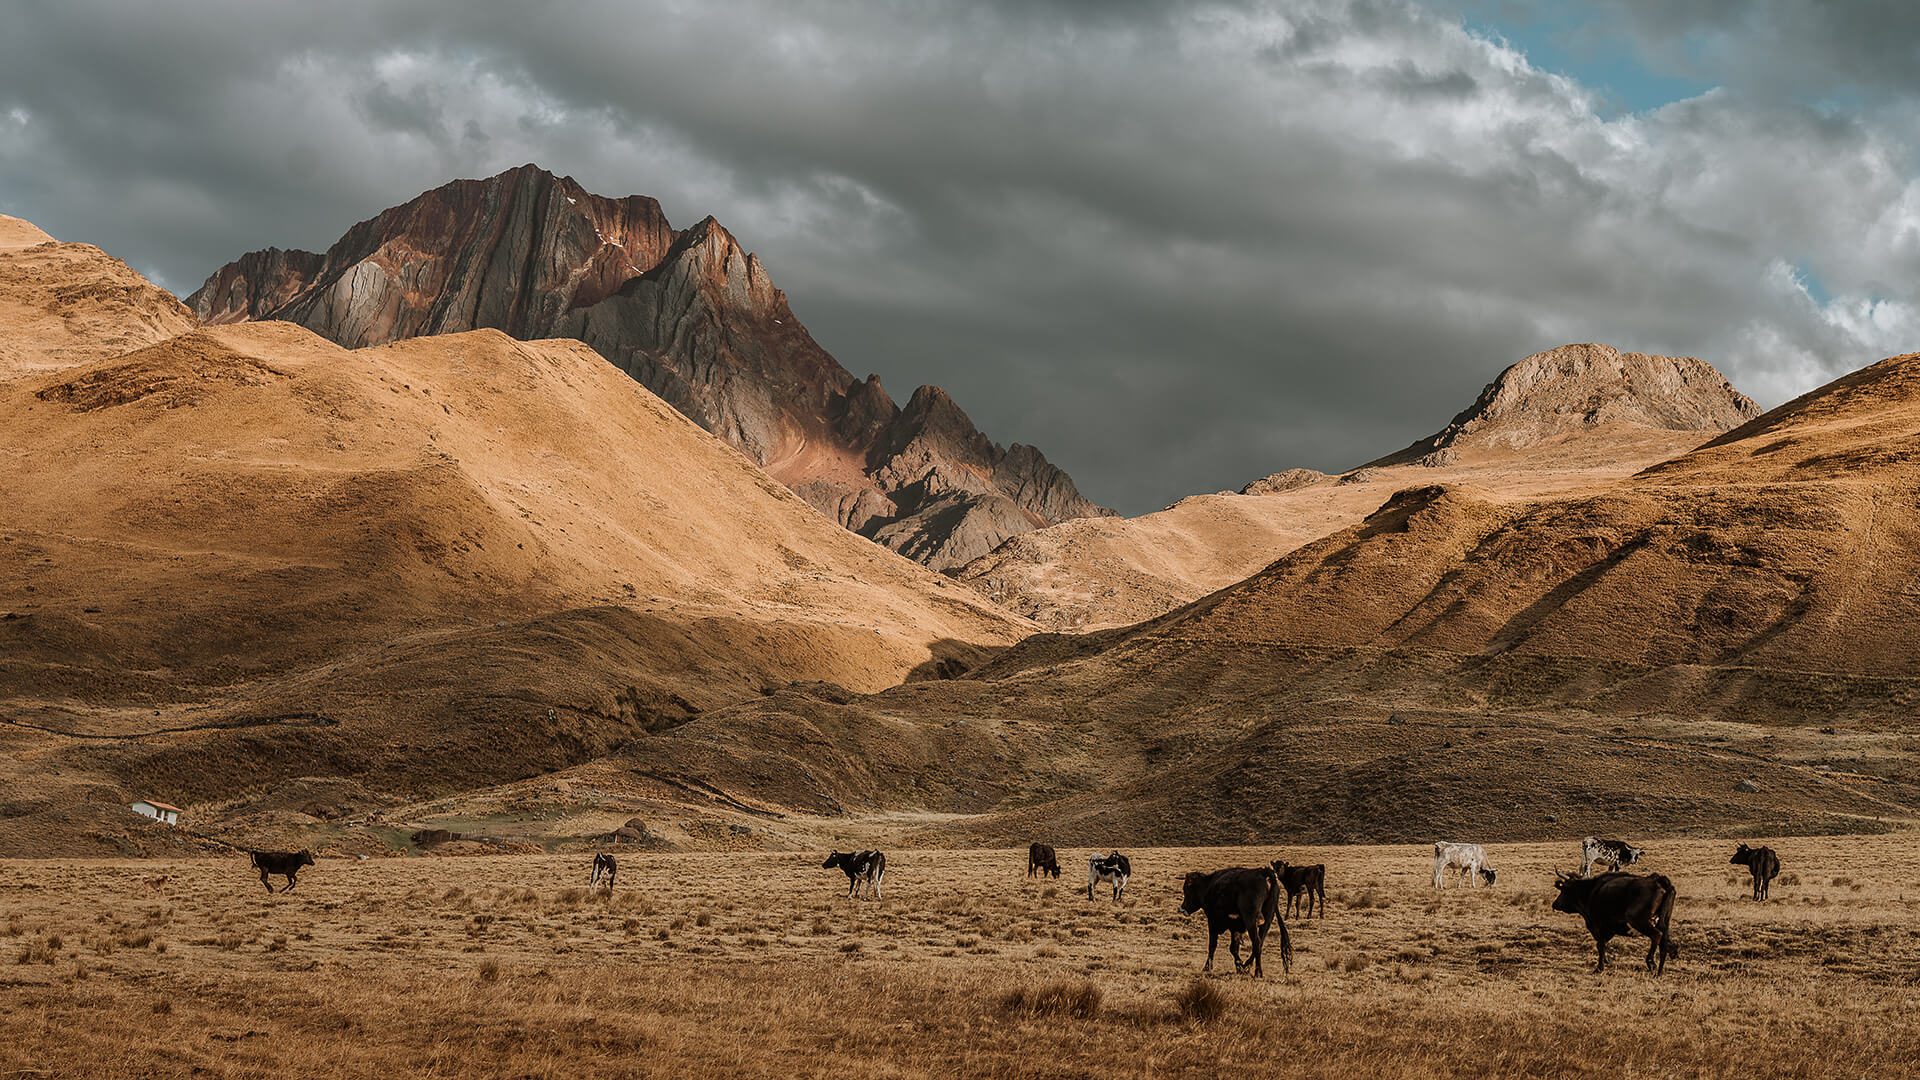 Grassland and cattle surrounded by mountains during the sunset (golden hour) | Llama Trek Olleros to Chavin with RESPONSible Travel Peru | Photo by Bjorn Snelders